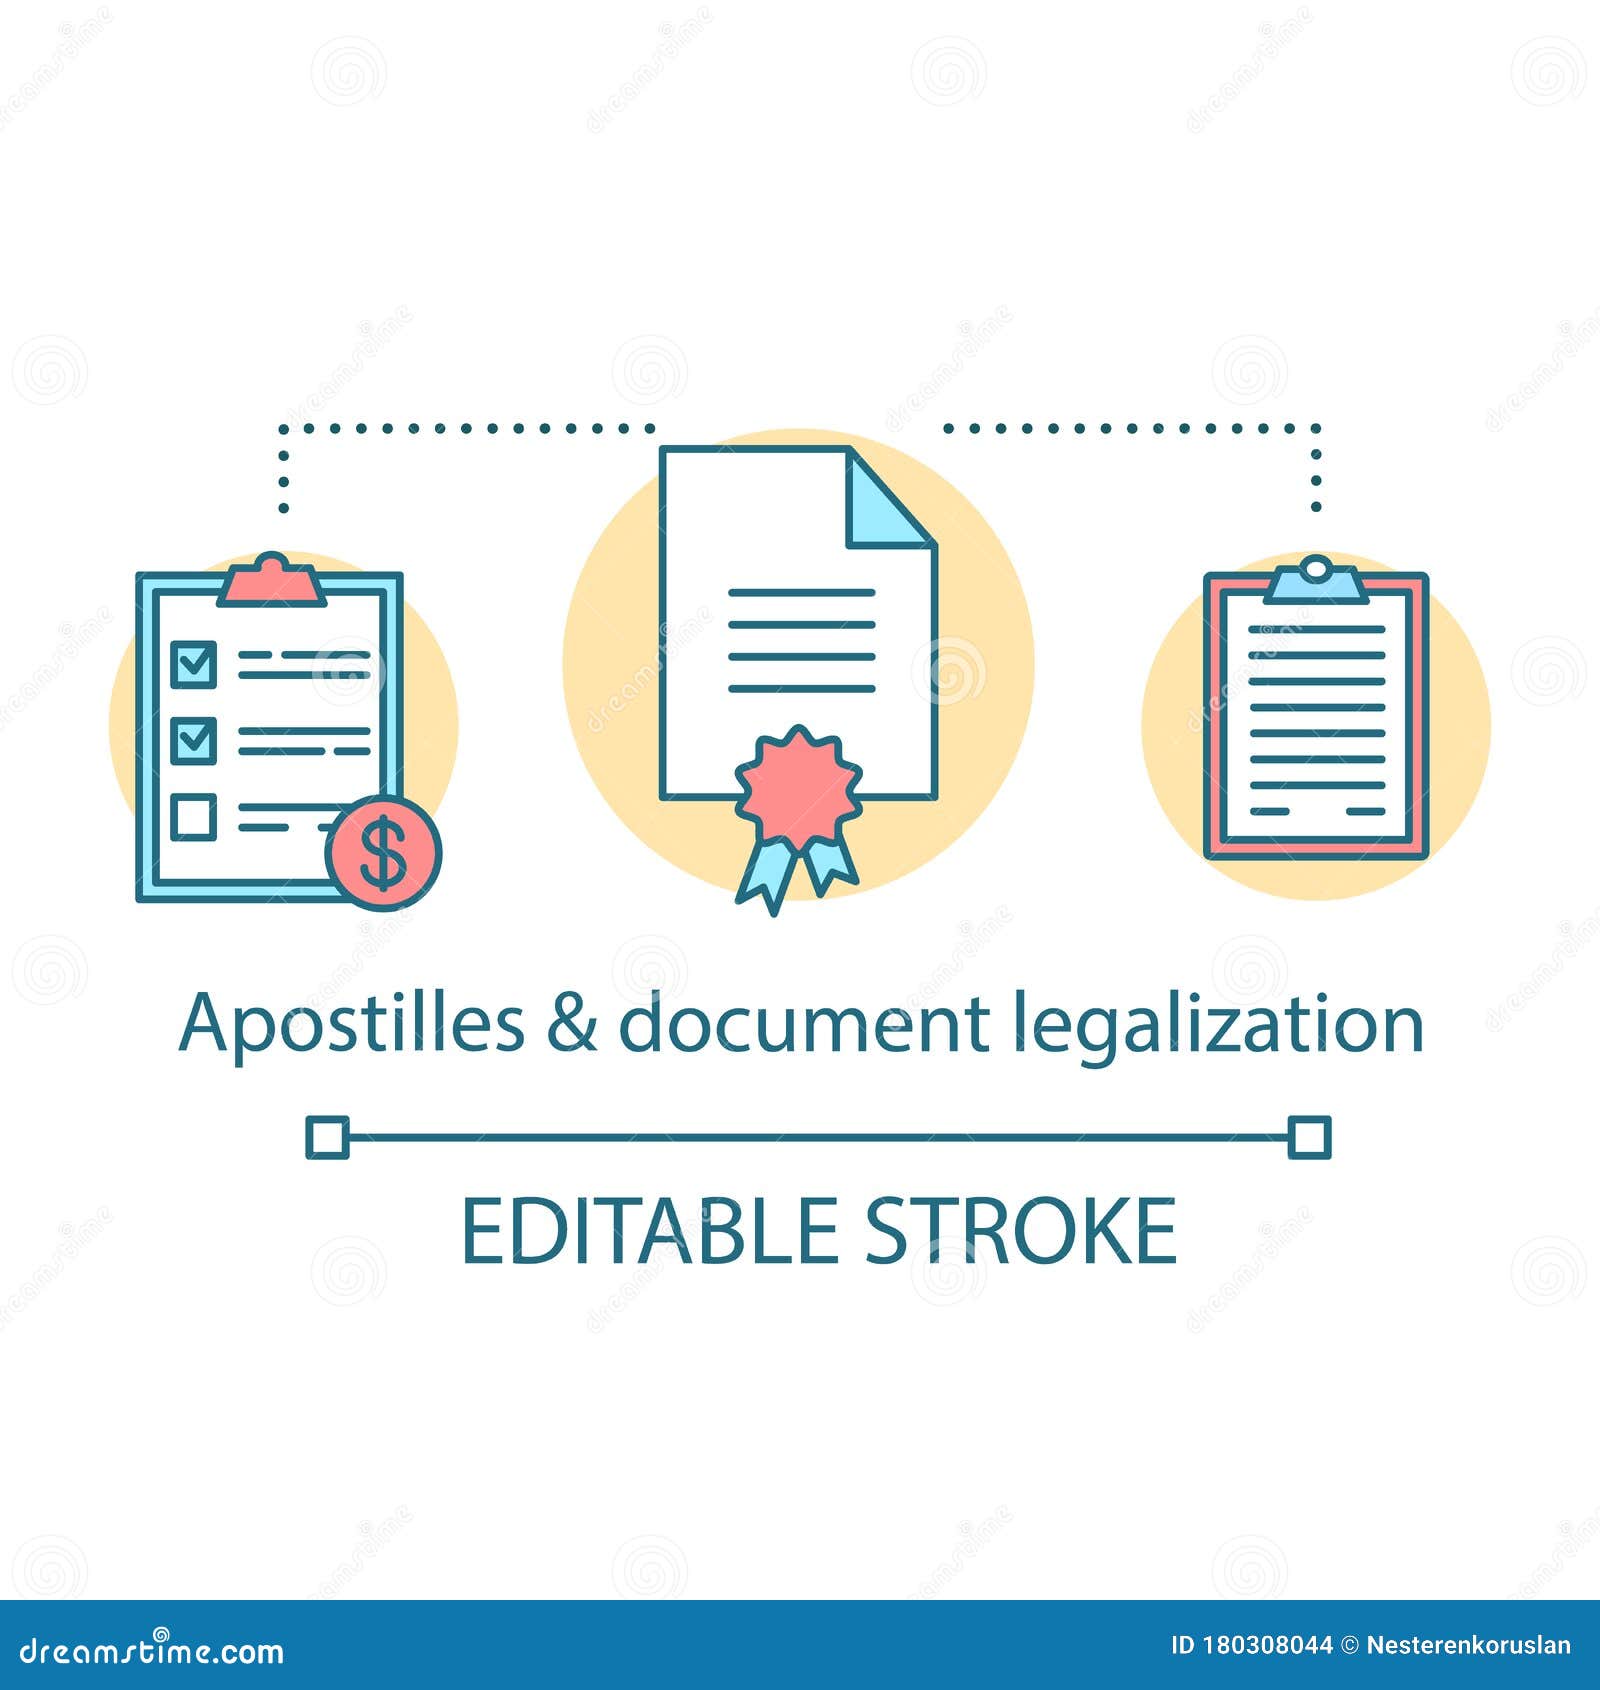 translation services concept icon. apostilles and document legalization idea thin line . legal paper and